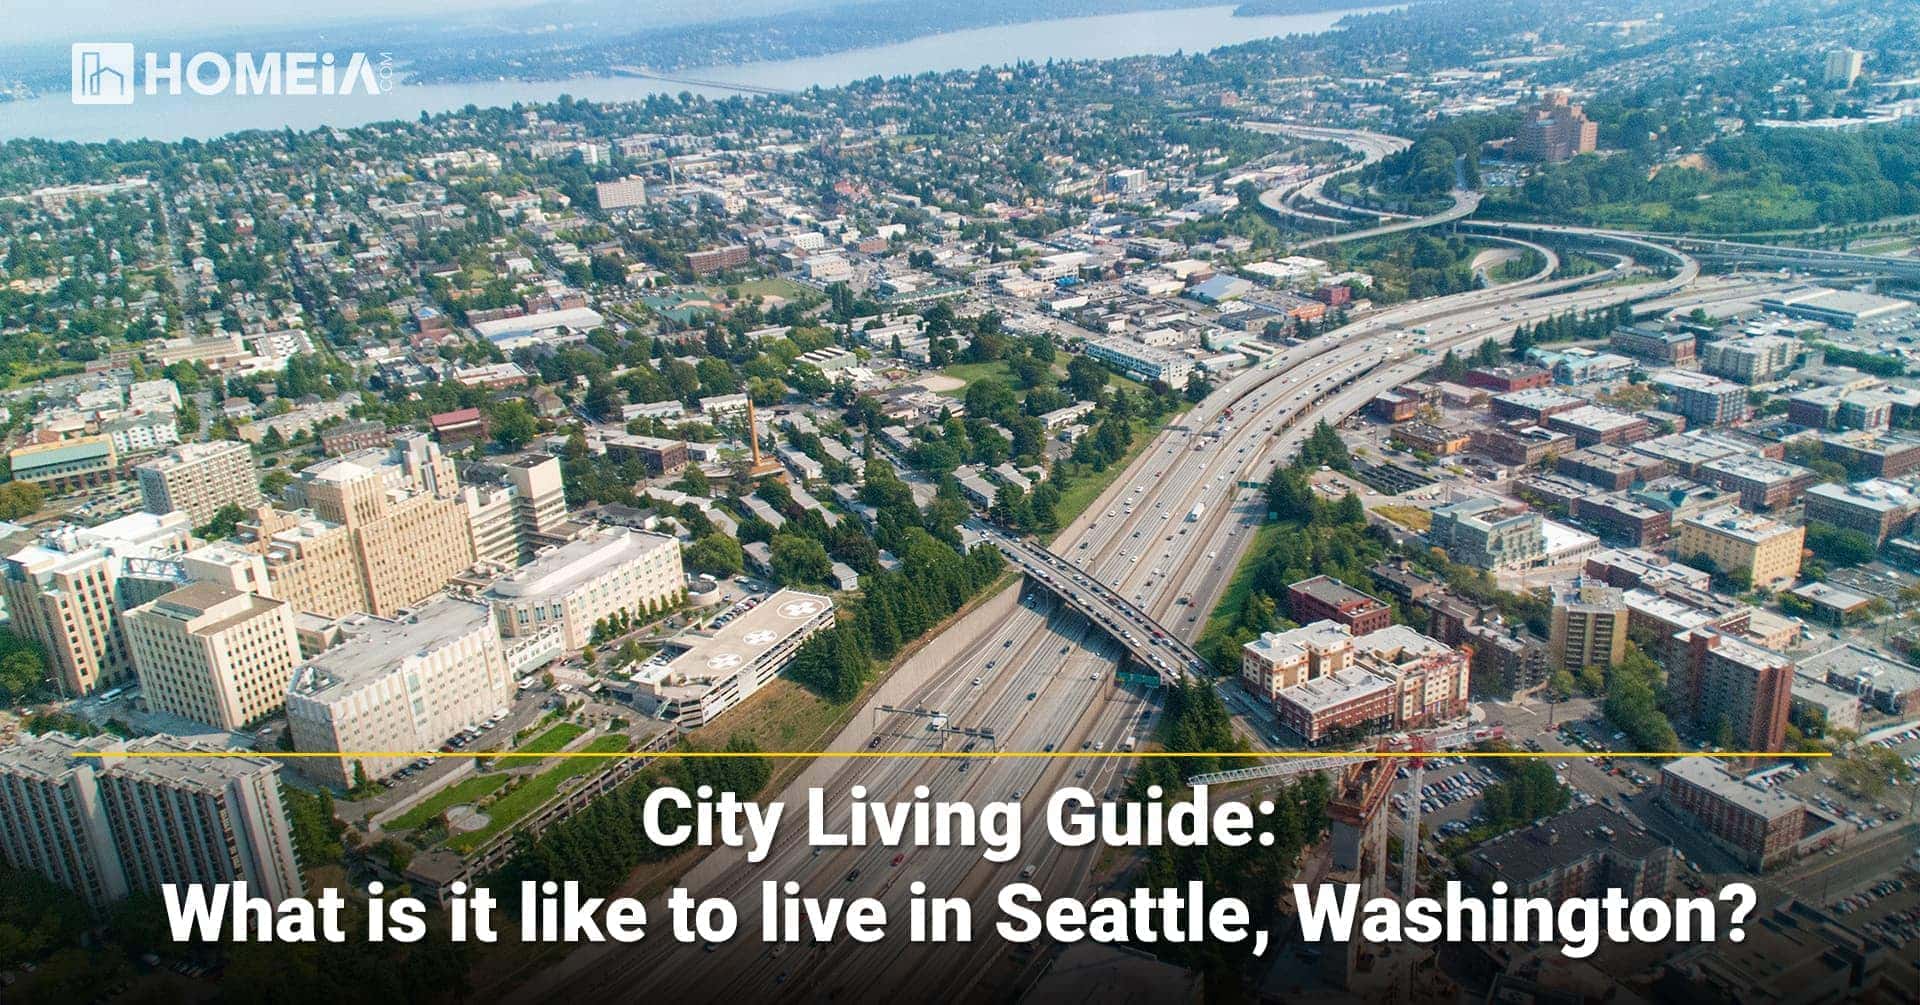 City-Living-Guide-What-is-it-like-to-live-in-Seattle-Washington